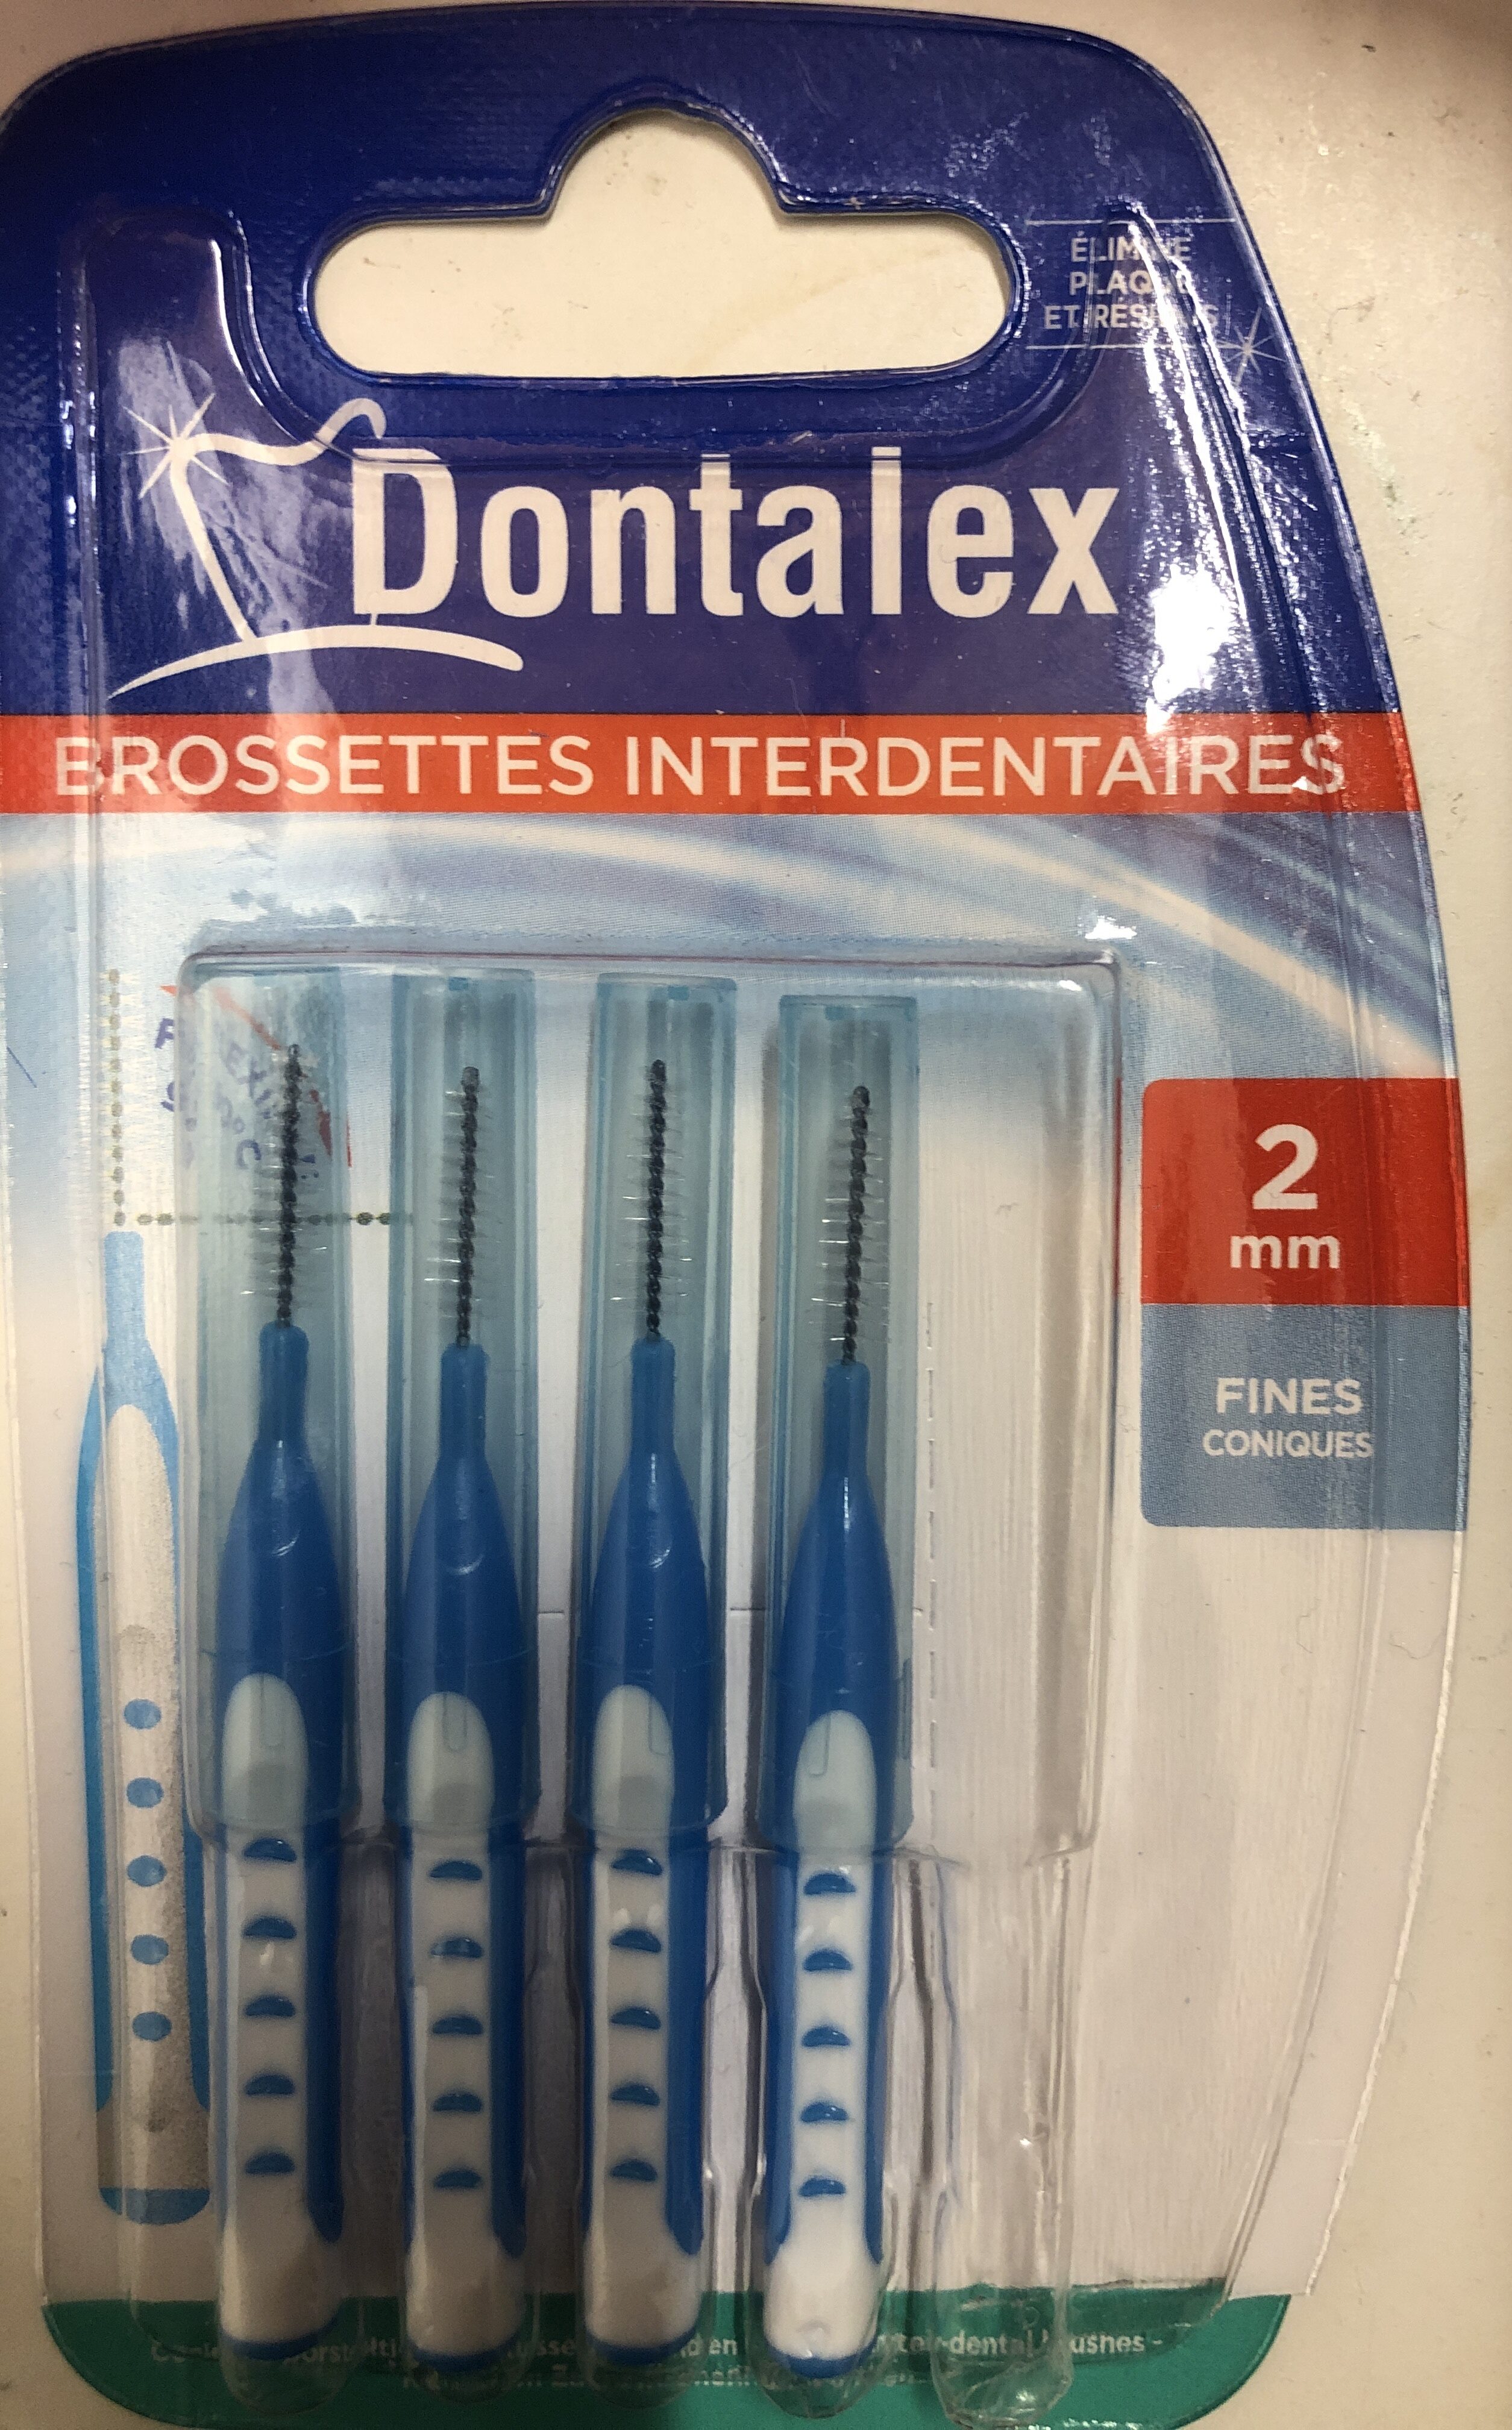 Brossettes interdentaires - Product - fr